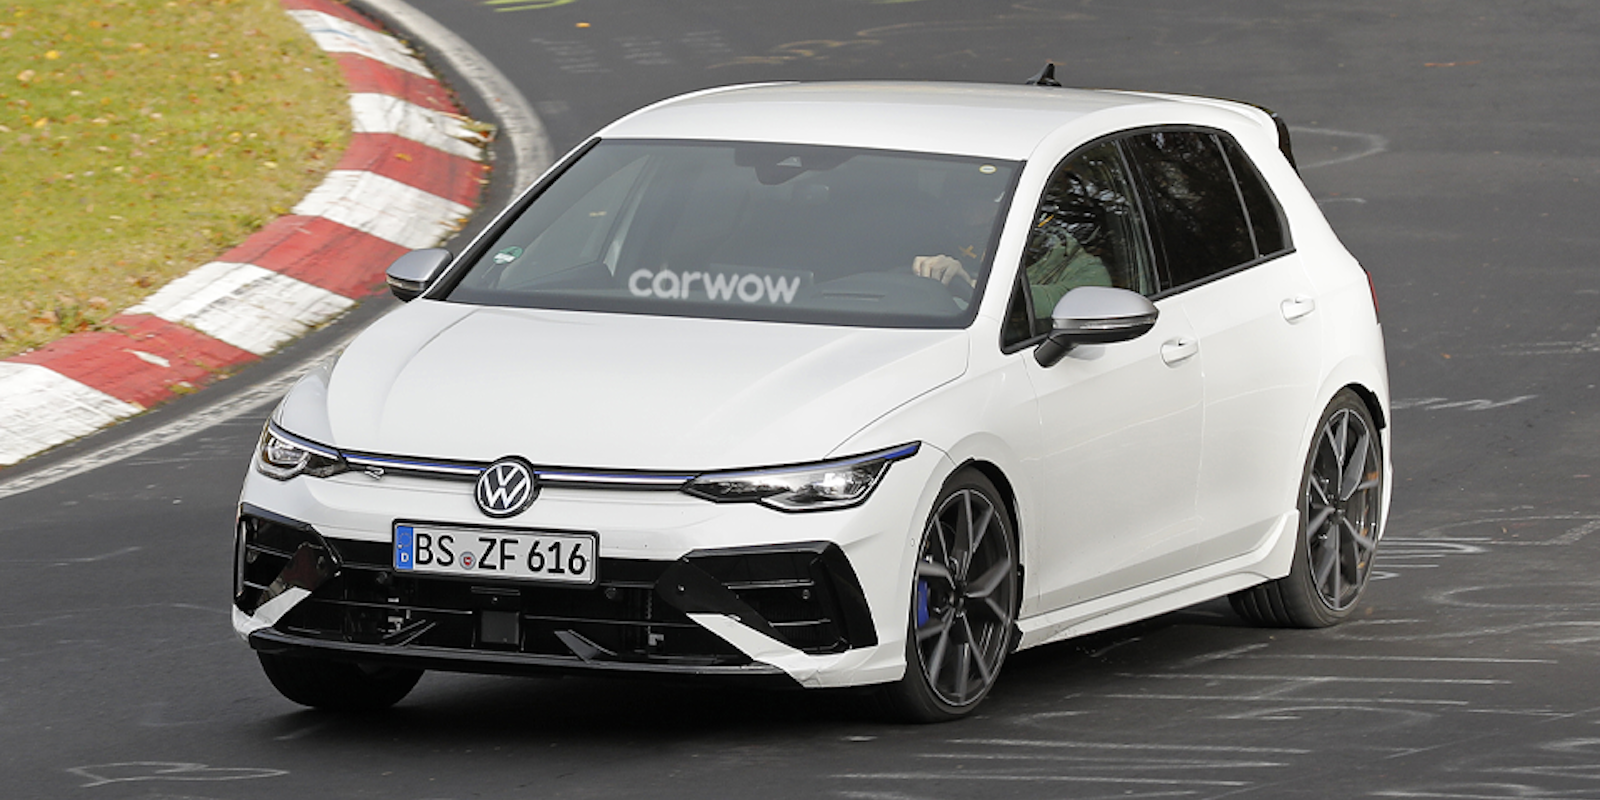 New Volkswagen Golf spotted: everything we know so far